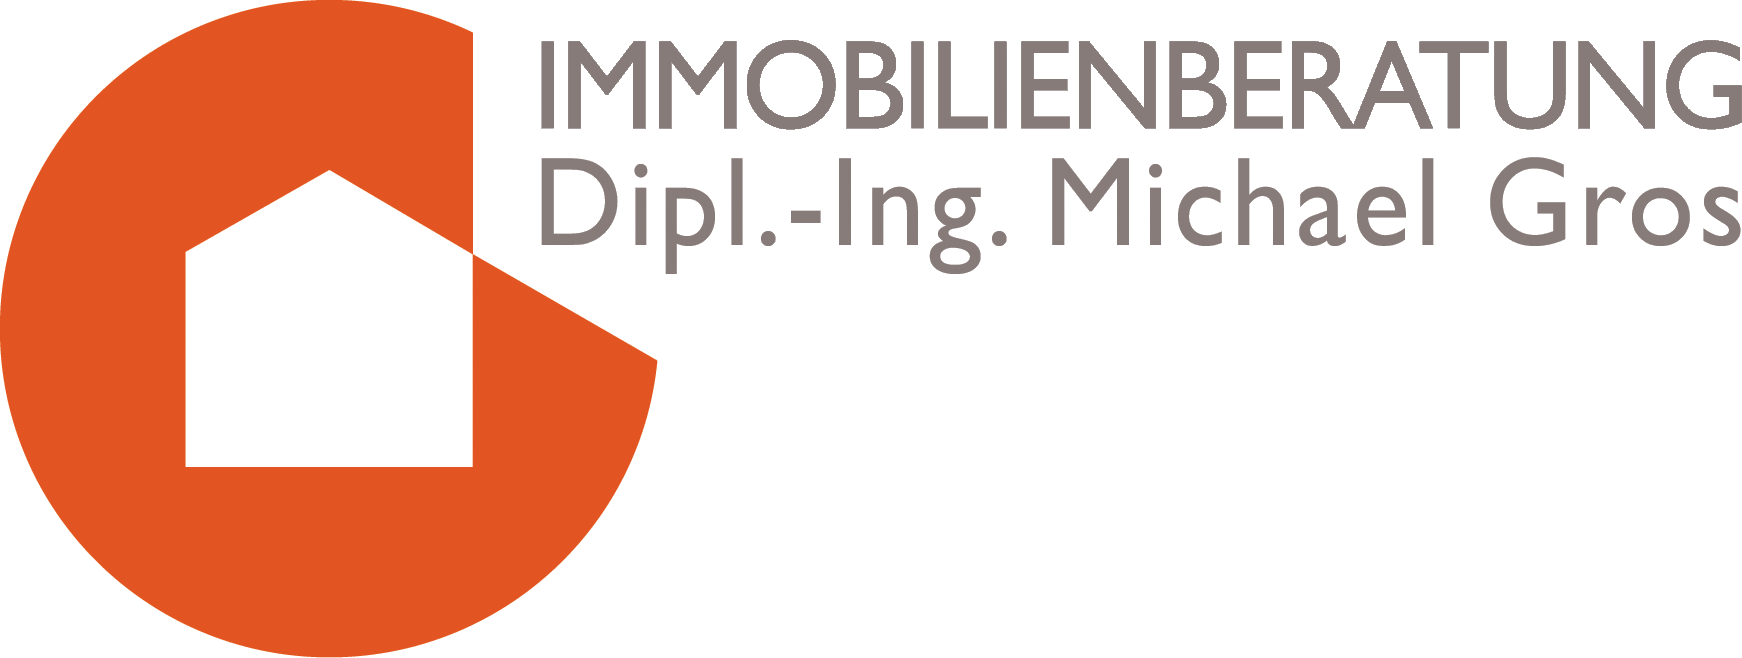 IMMOBILIENBERATUNG Dipl.-Ing. Michael Gros